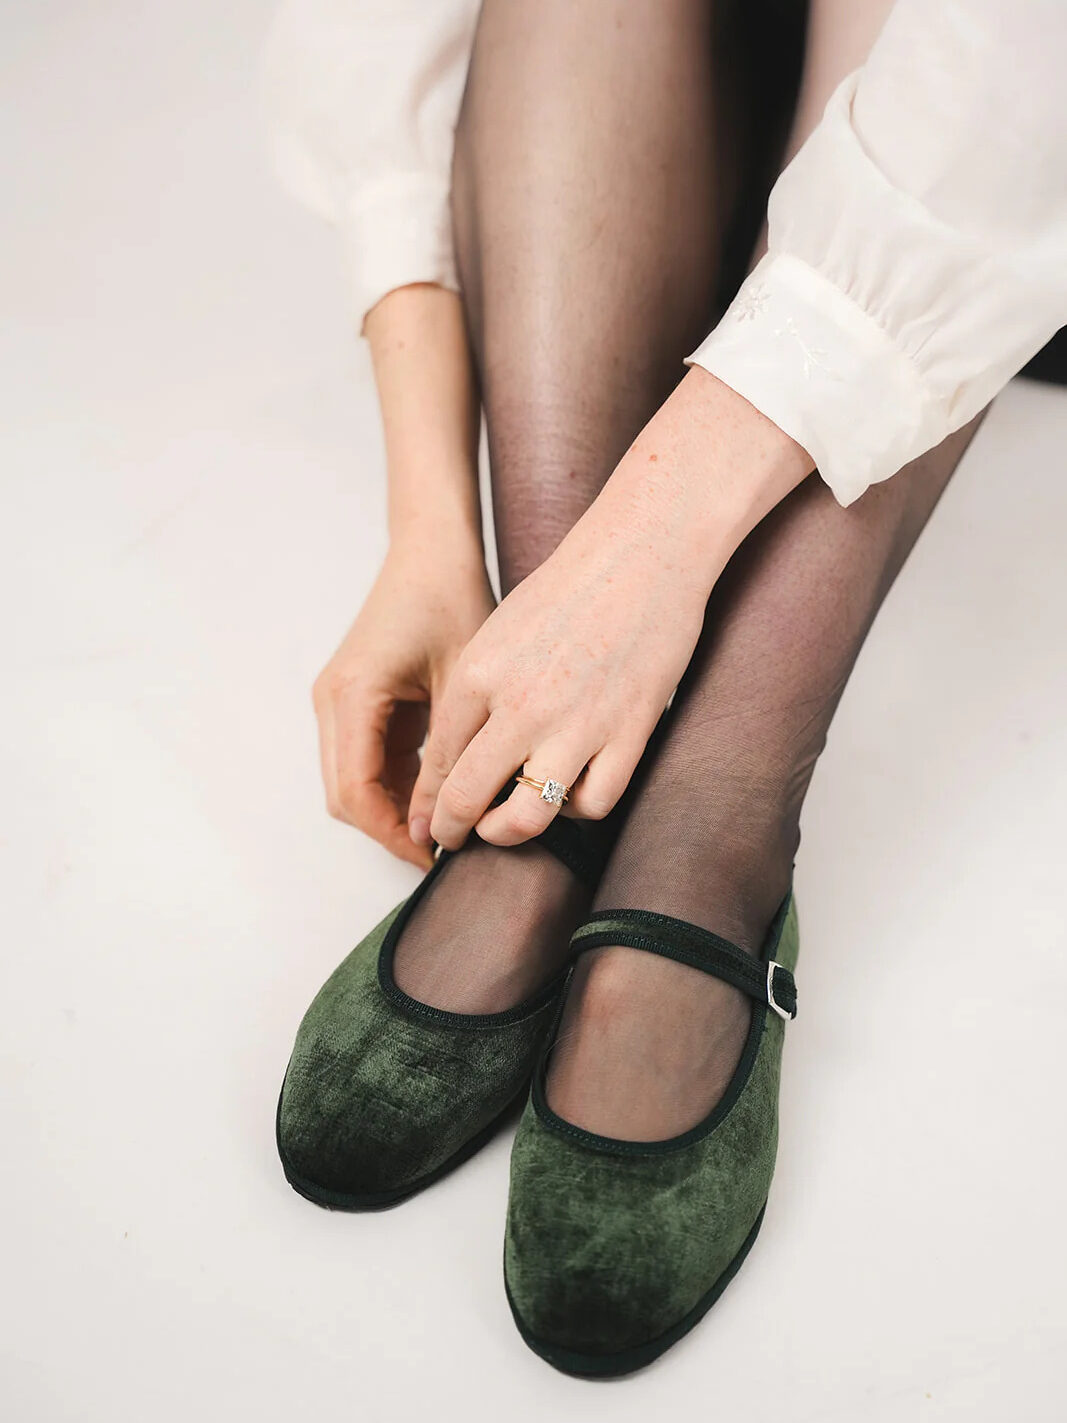 A person sitting with crossed legs, wearing dark green mary jane shoes and sheer black tights, adjusts a shoe with her hands.